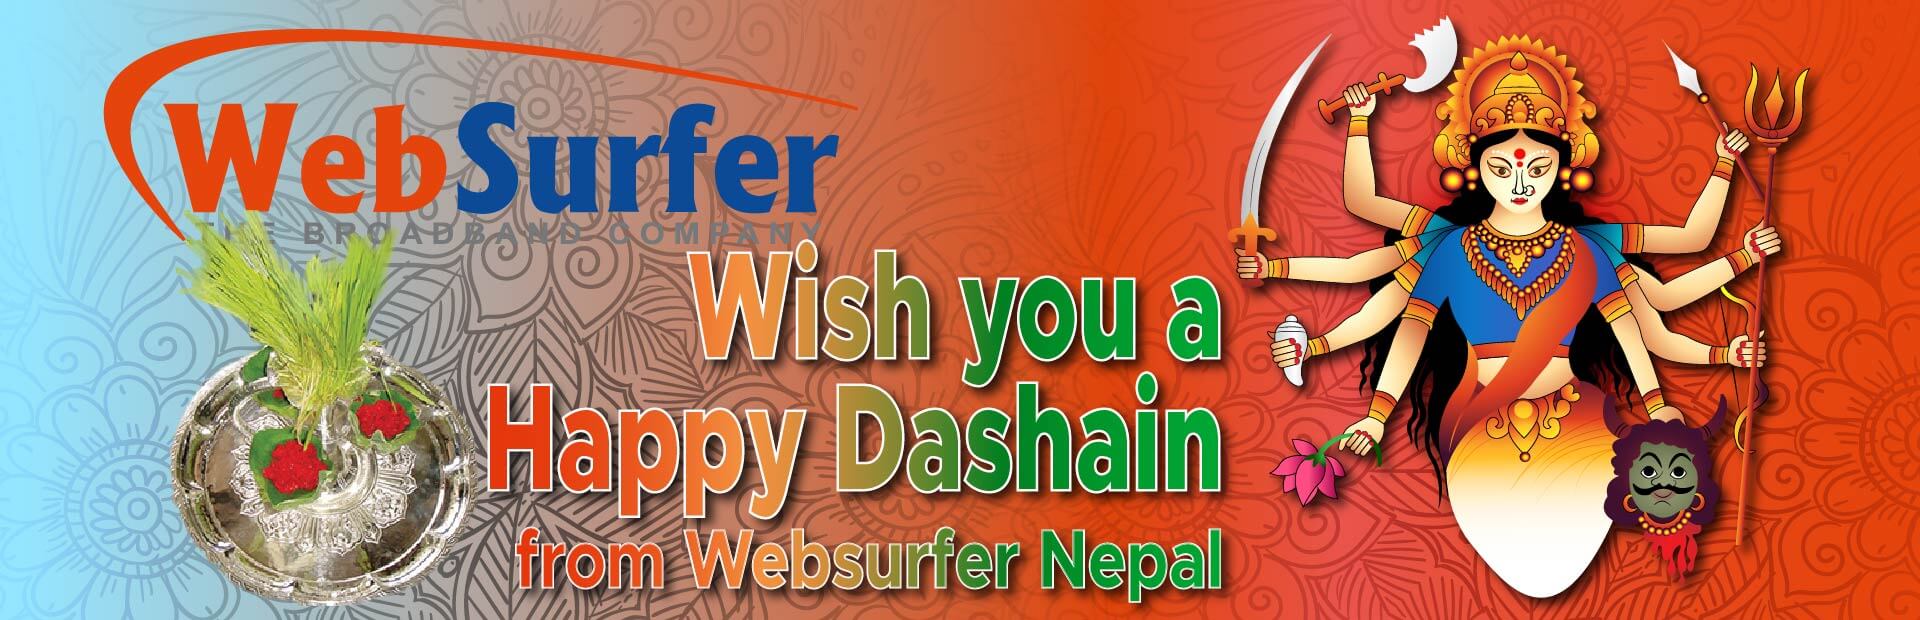 Wish You a Happy Dashain From Websurfer Nepal.